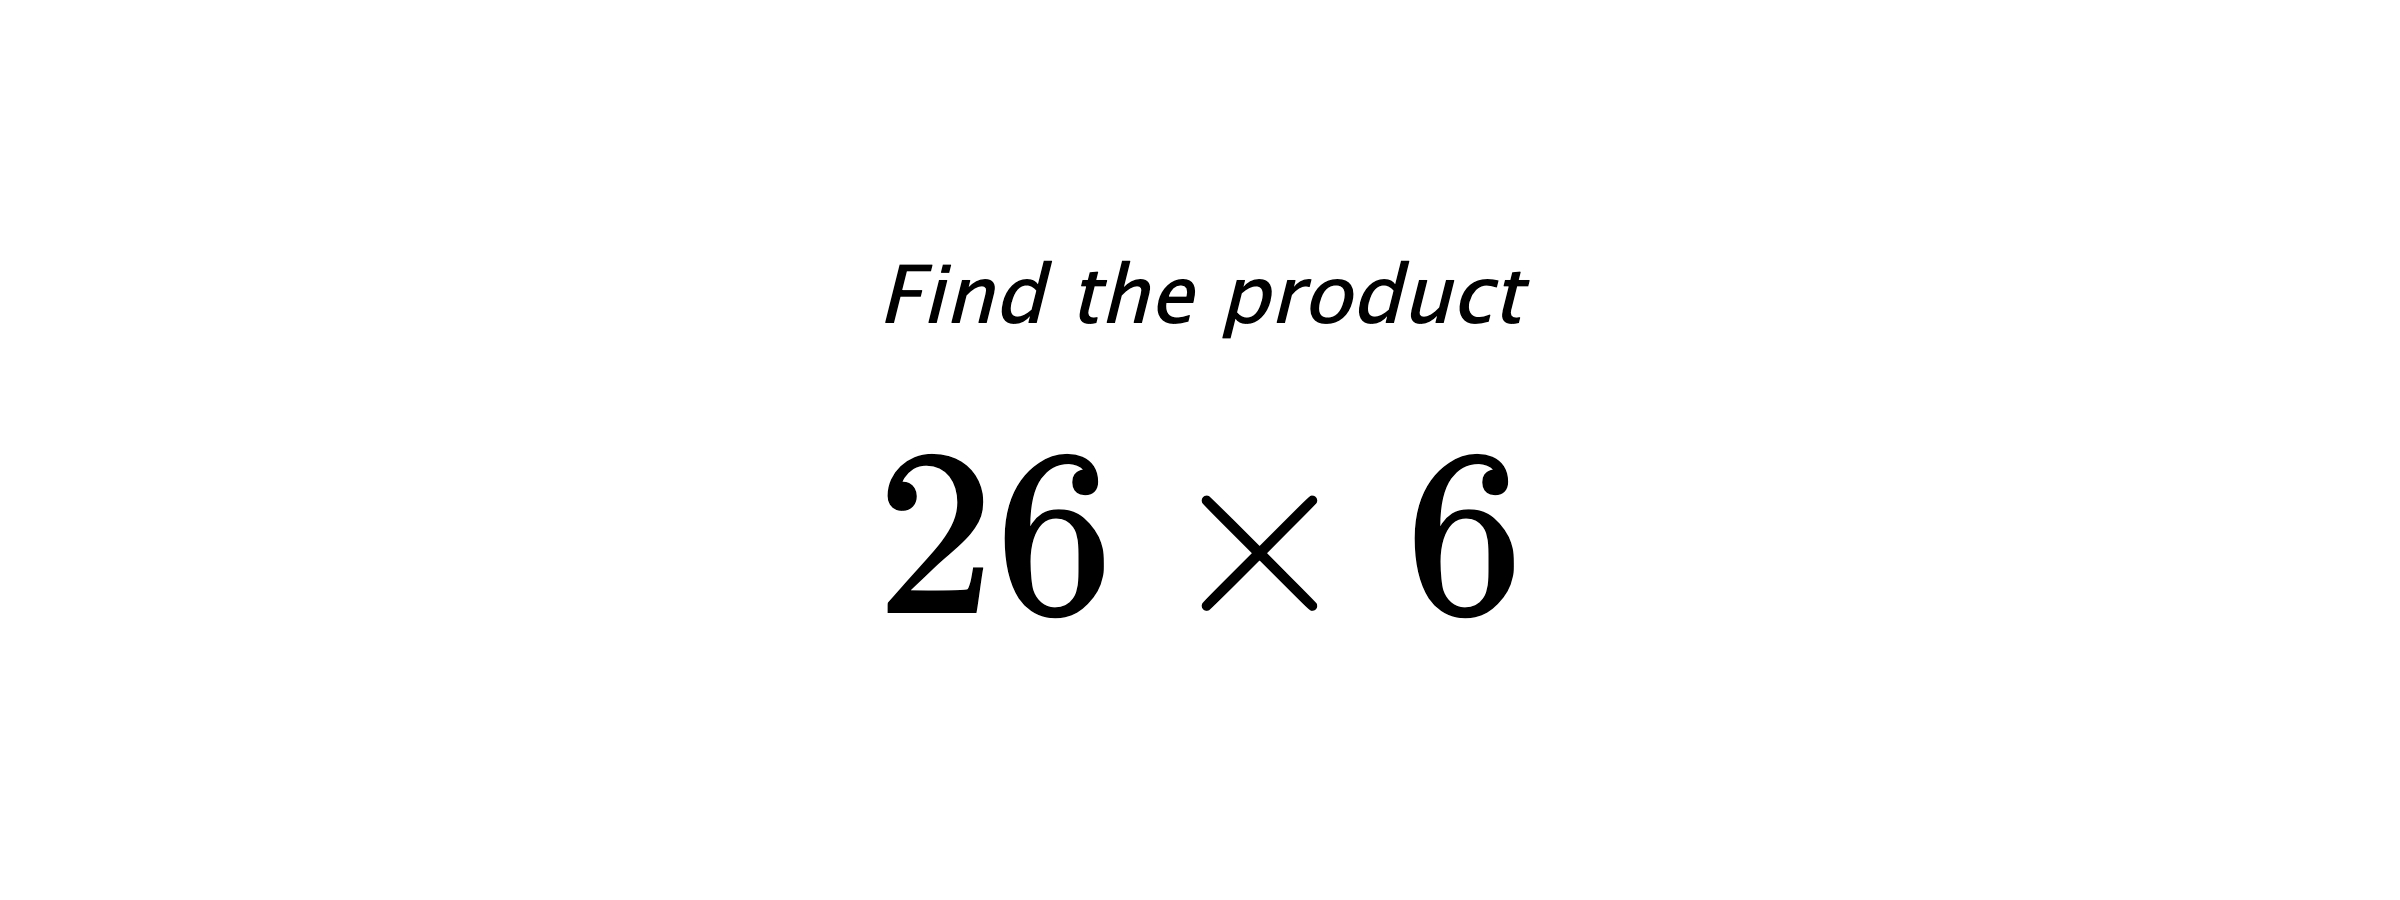 Find the product $ 26 \times 6 $